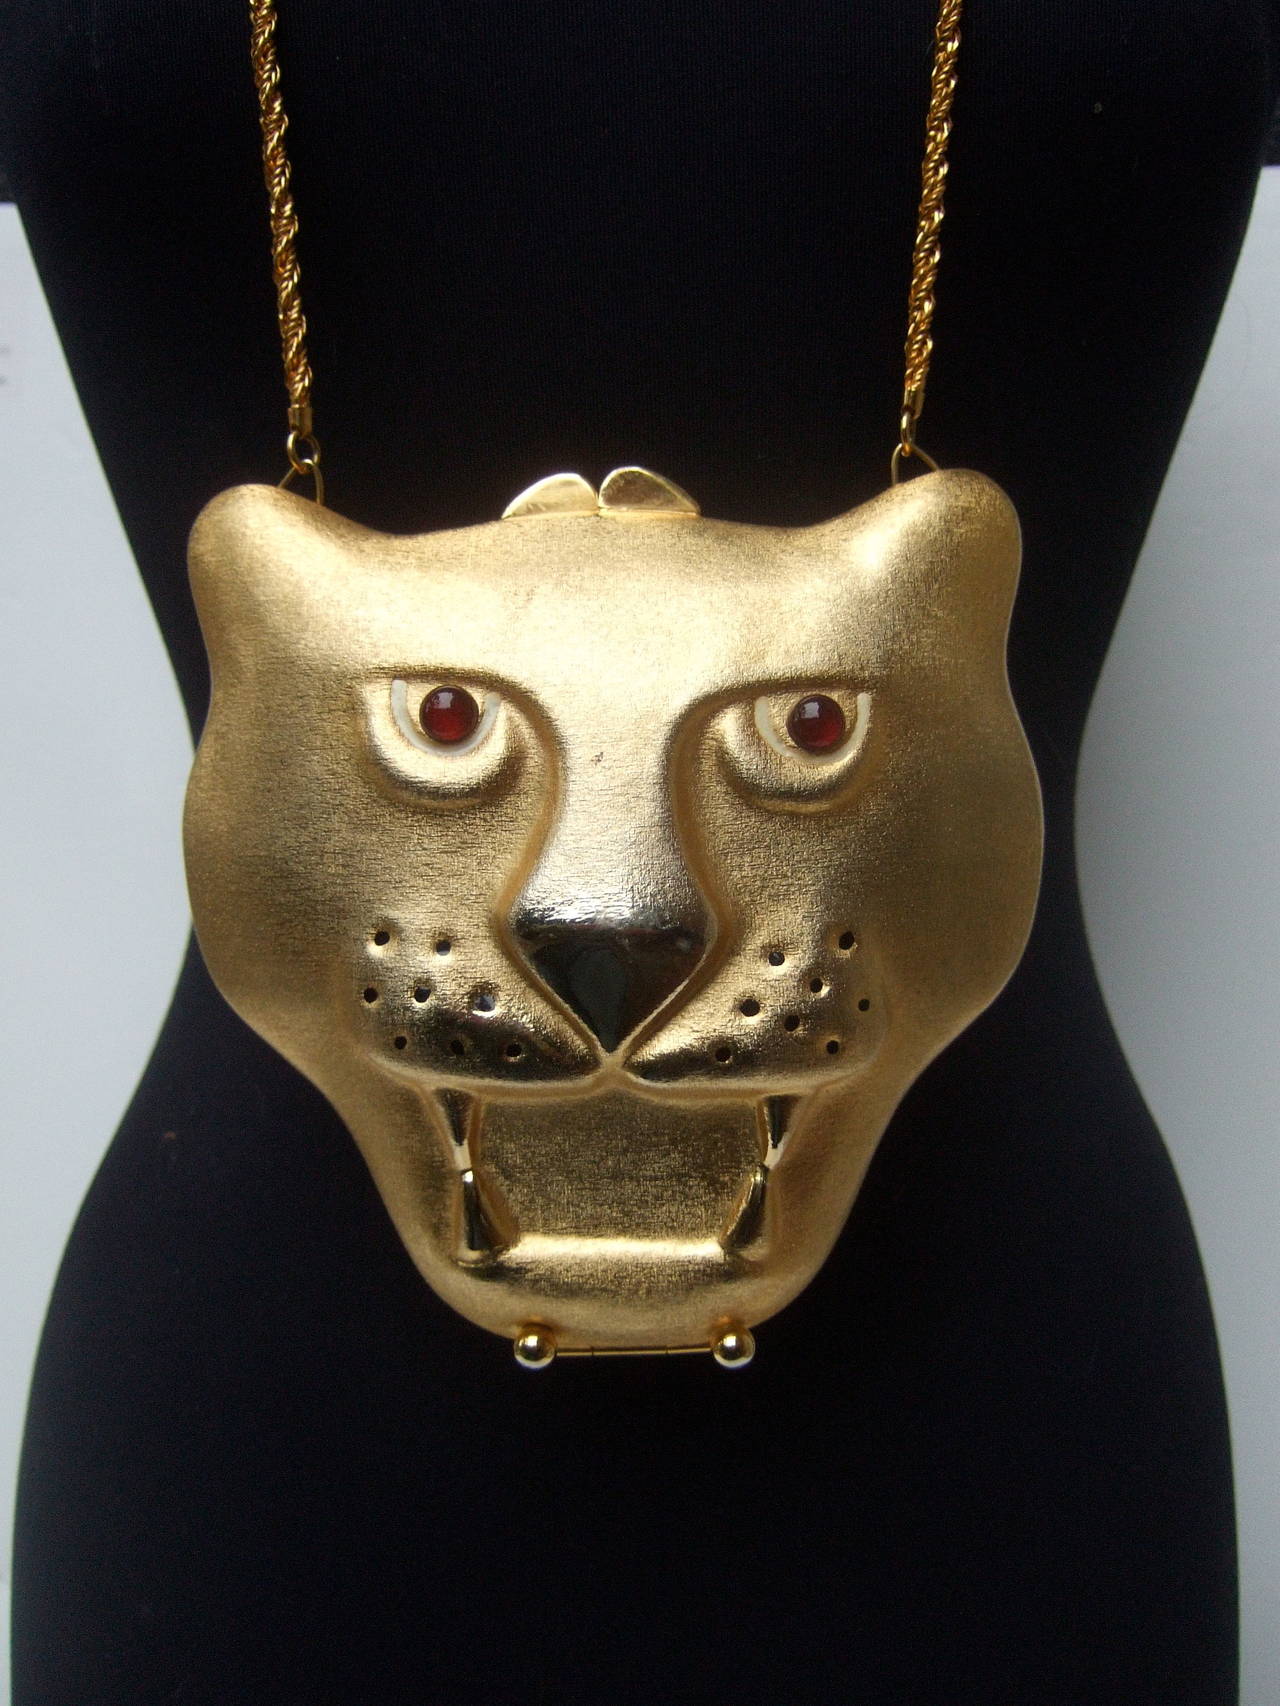 SAKS FIFTH AVENUE Gilt metal evening bag Made in Italy c 1970
The opulent minaudiere purse is designed with an exotic gold metal panther's head
The eyes are embellished with ruby color glass cabochons accented
with black enamel impressed